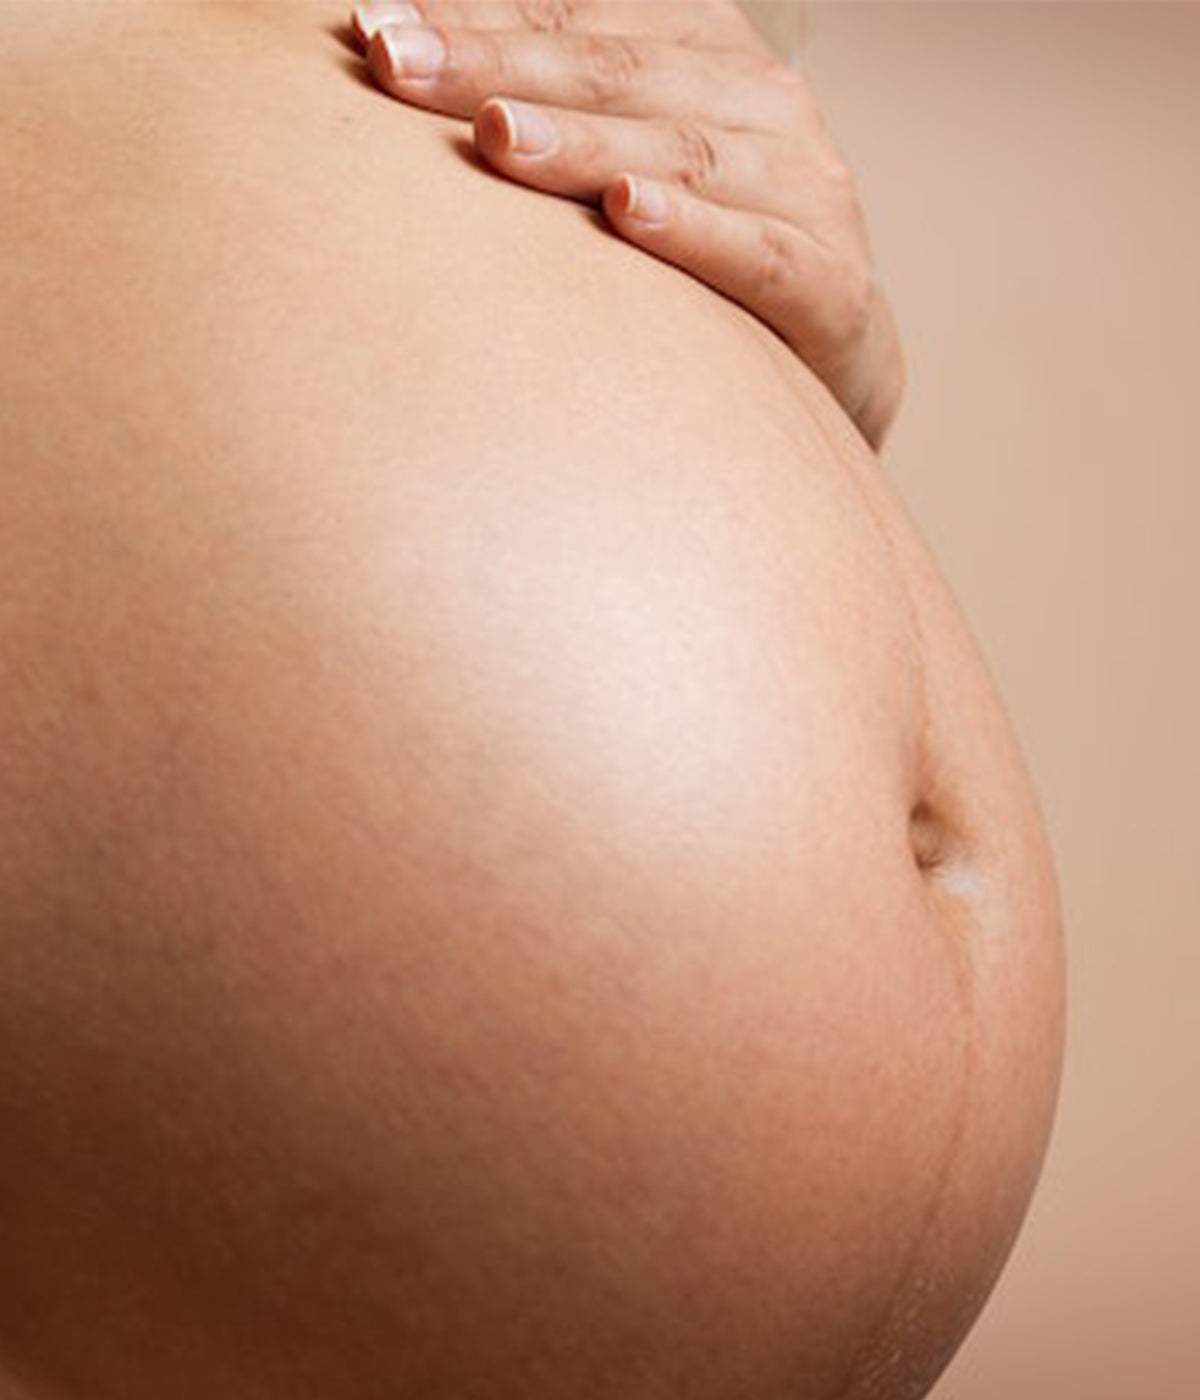 Getting Drainage Massage While Pregnant: Health Tips for Moms-to-be